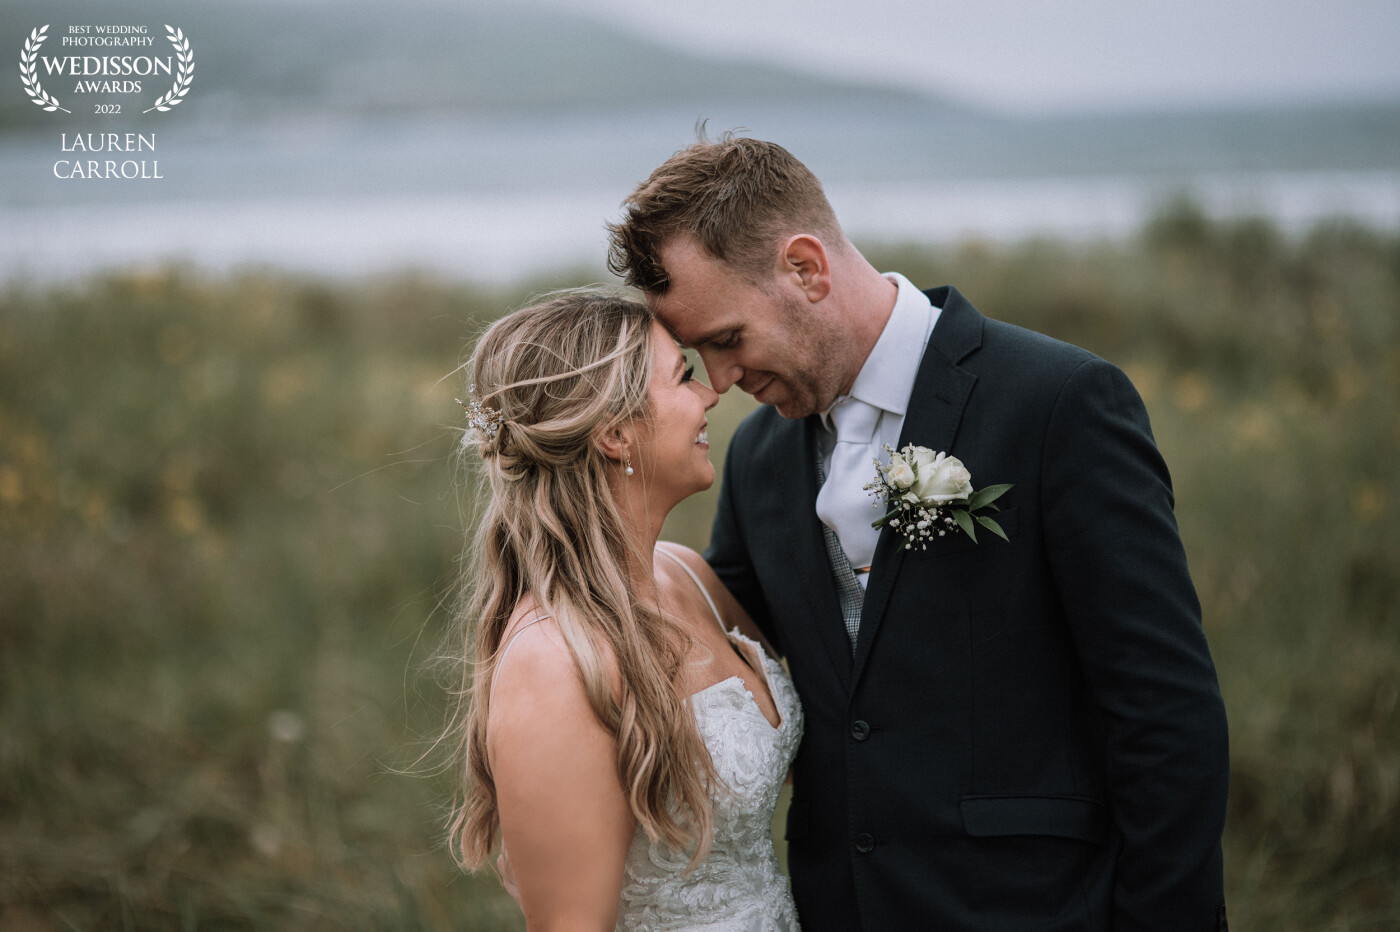 What a gorgeous connection these two had! Minutes before the rain came, we snapped a quick few shots on the beach. Location Narin/Portnoo Beach, Donegal Ireand.